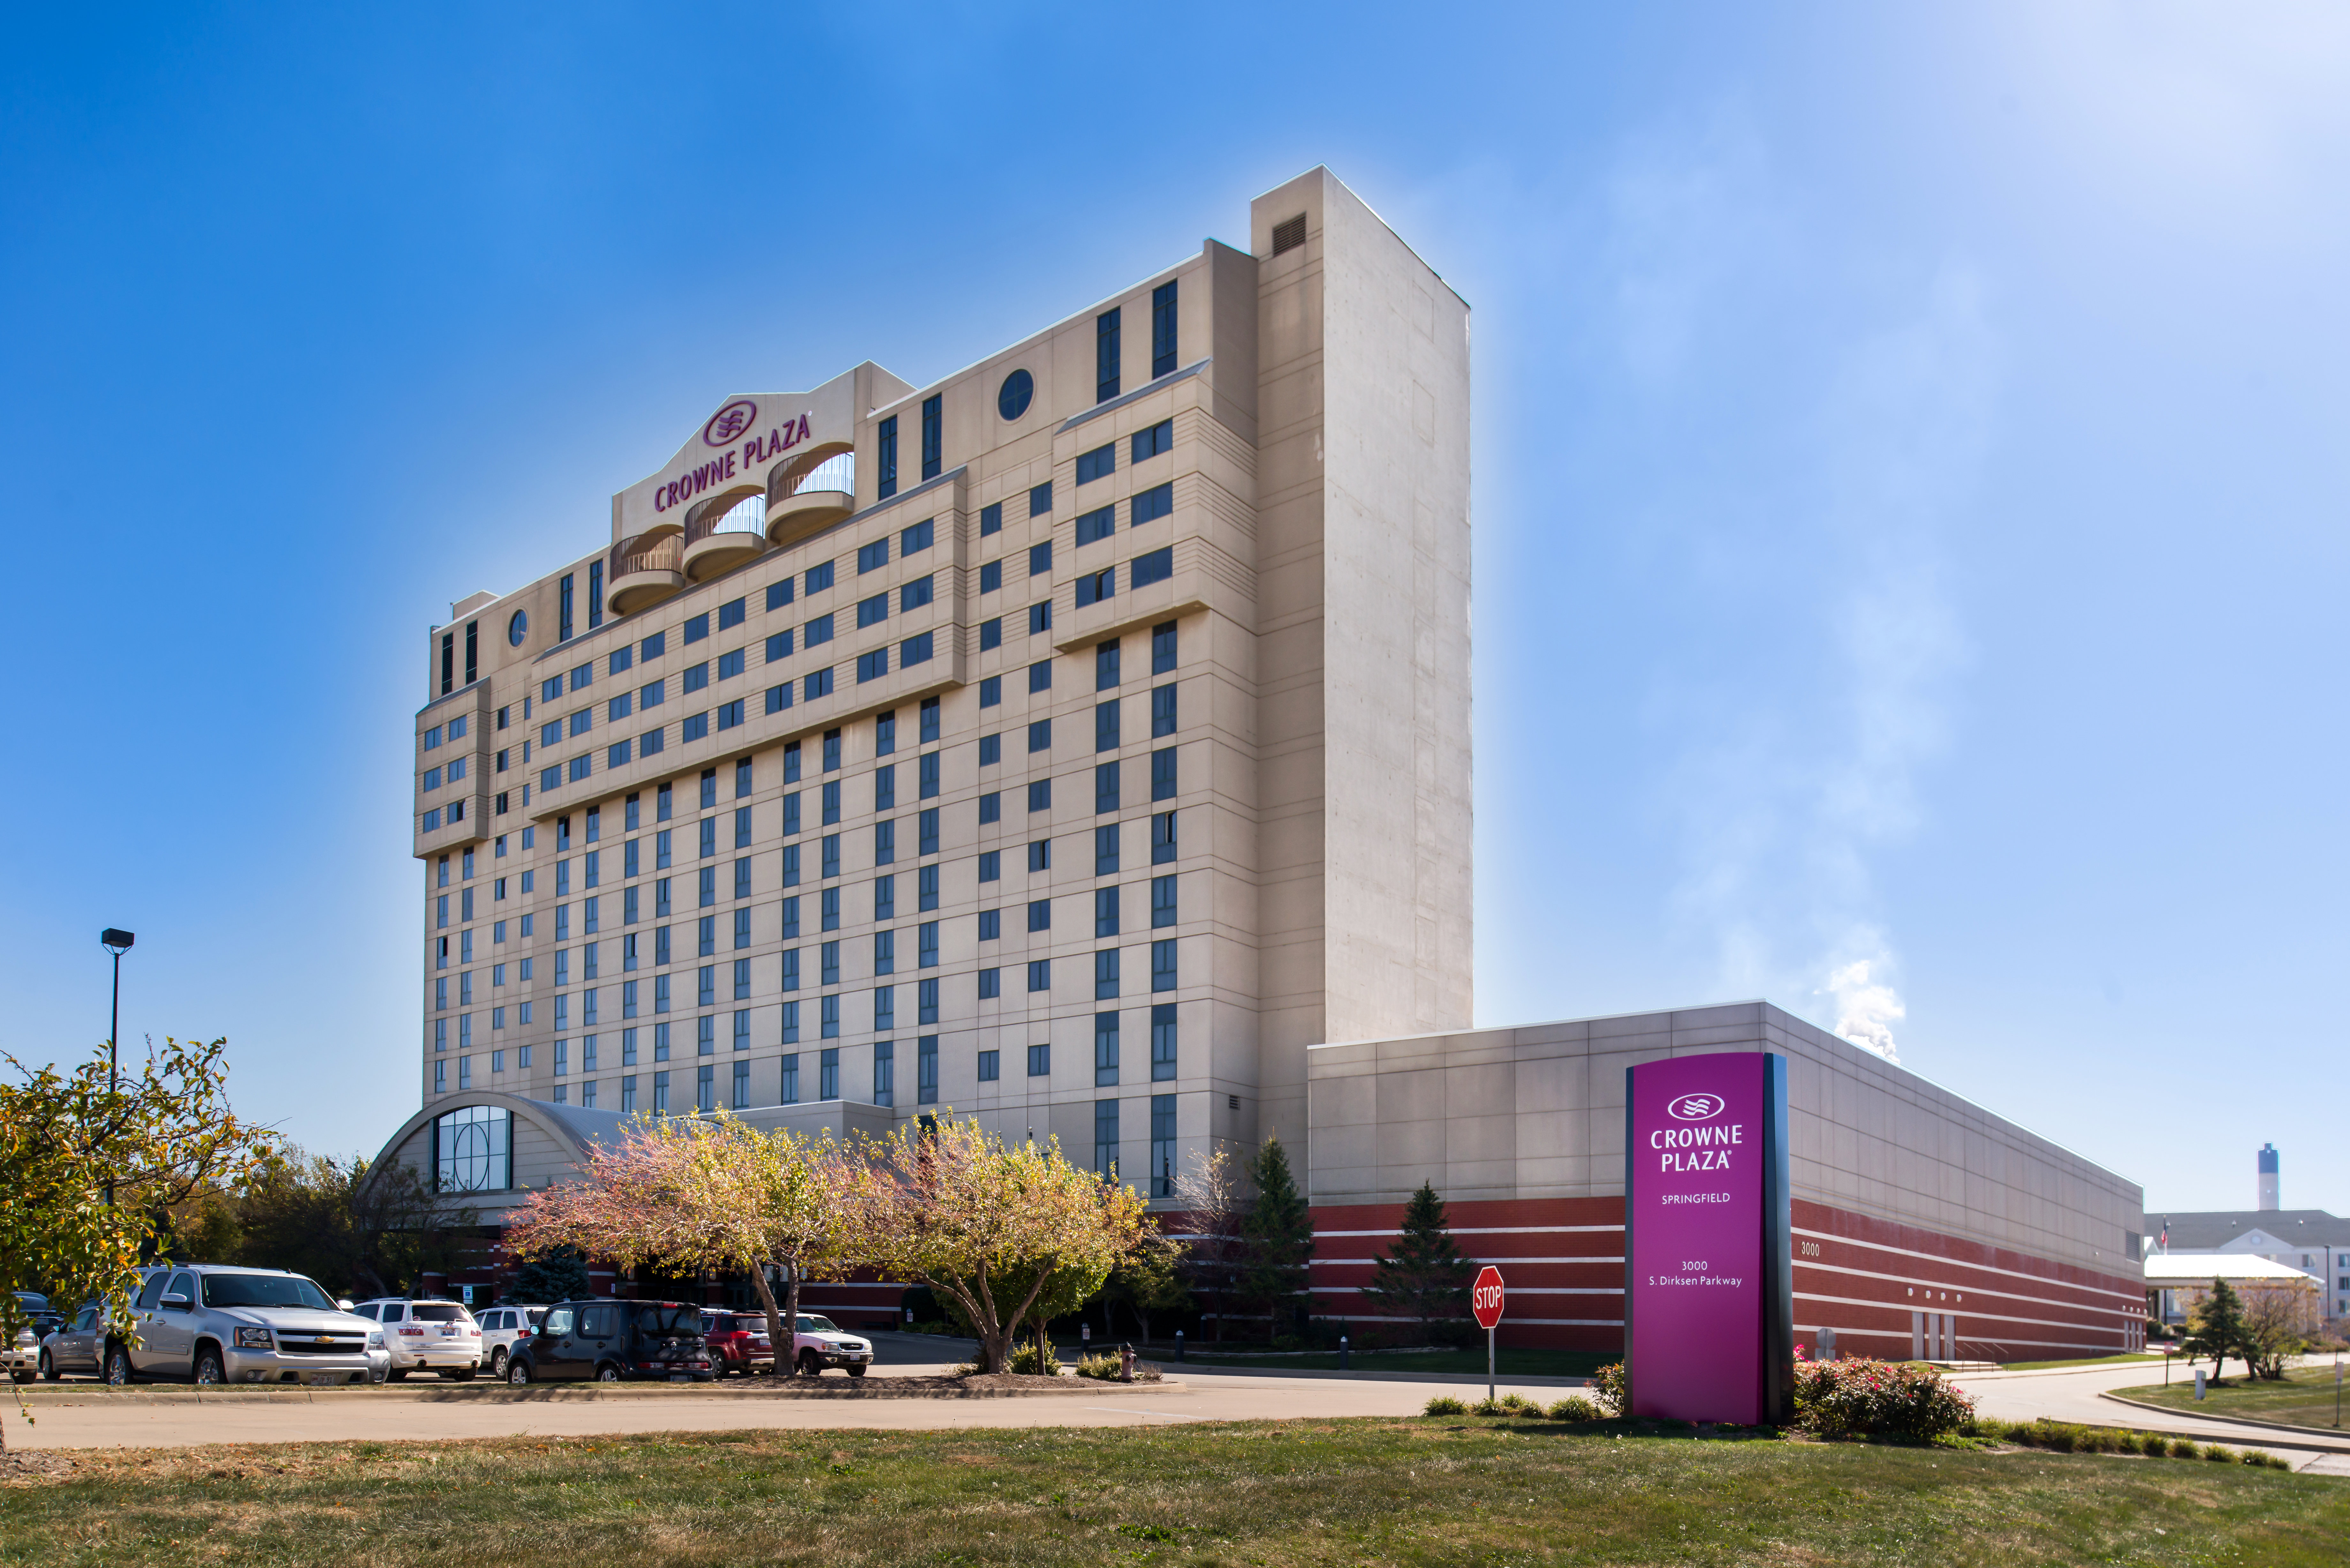 Crowne Plaza is conveniently located off Interstate 55 & 72